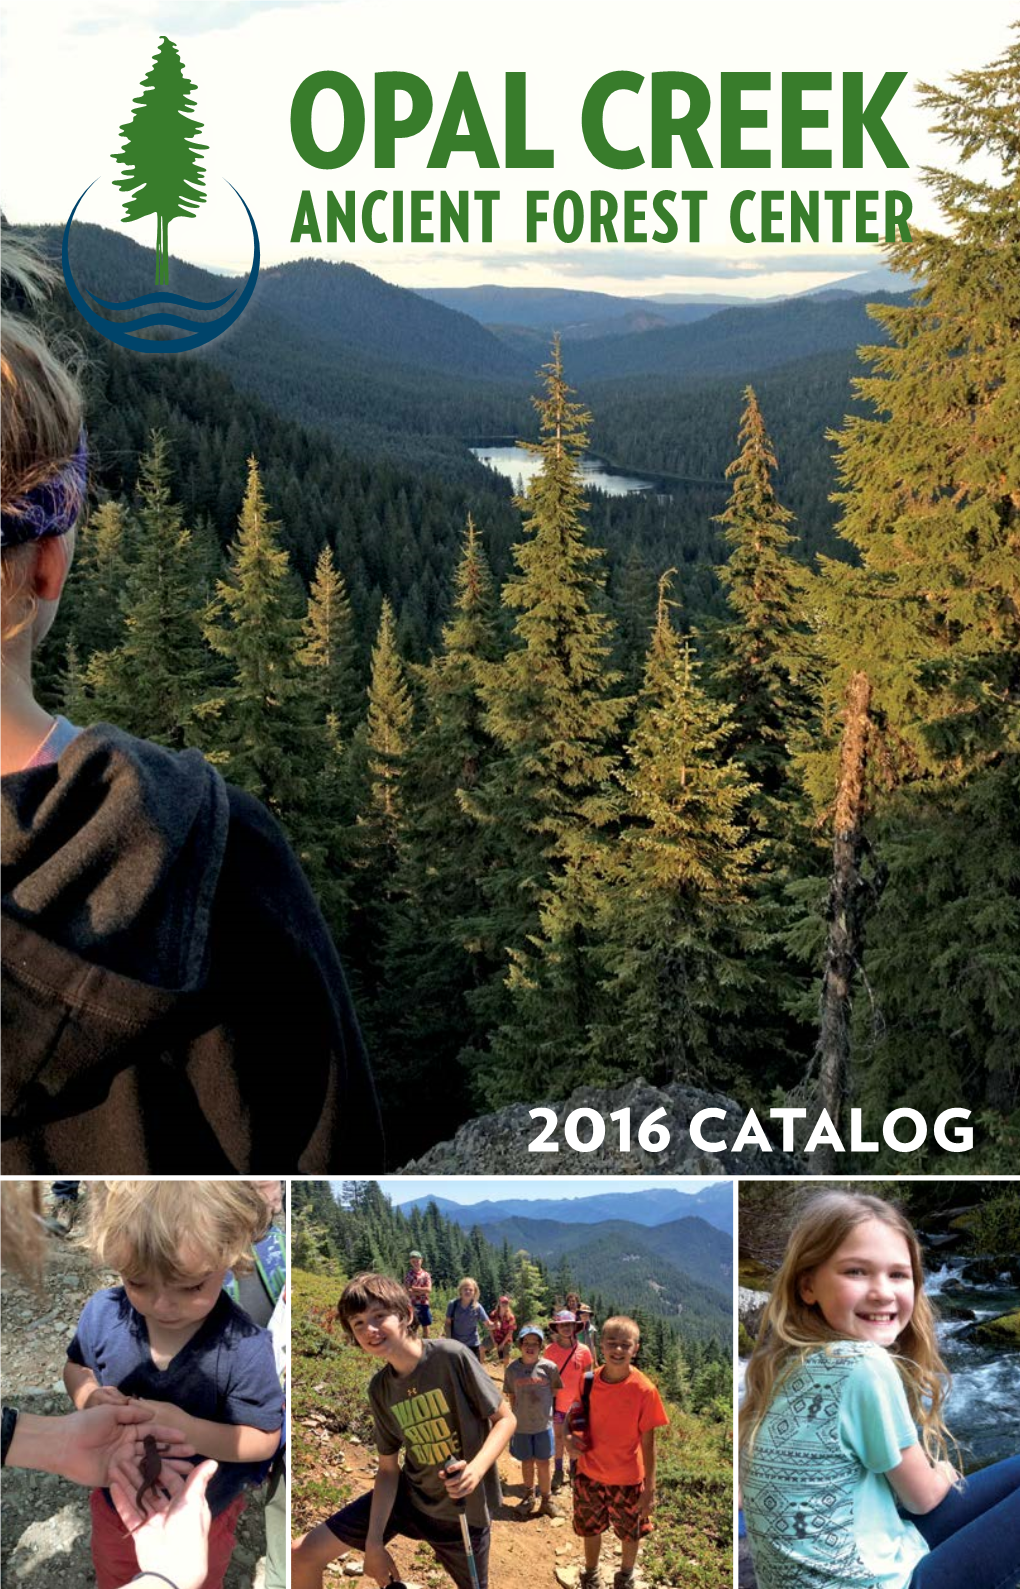 2016 Catalog 2 Welcome Opal Creek Ancient Forest Center V Id J O H Nson a : S Te V En D P H Oto